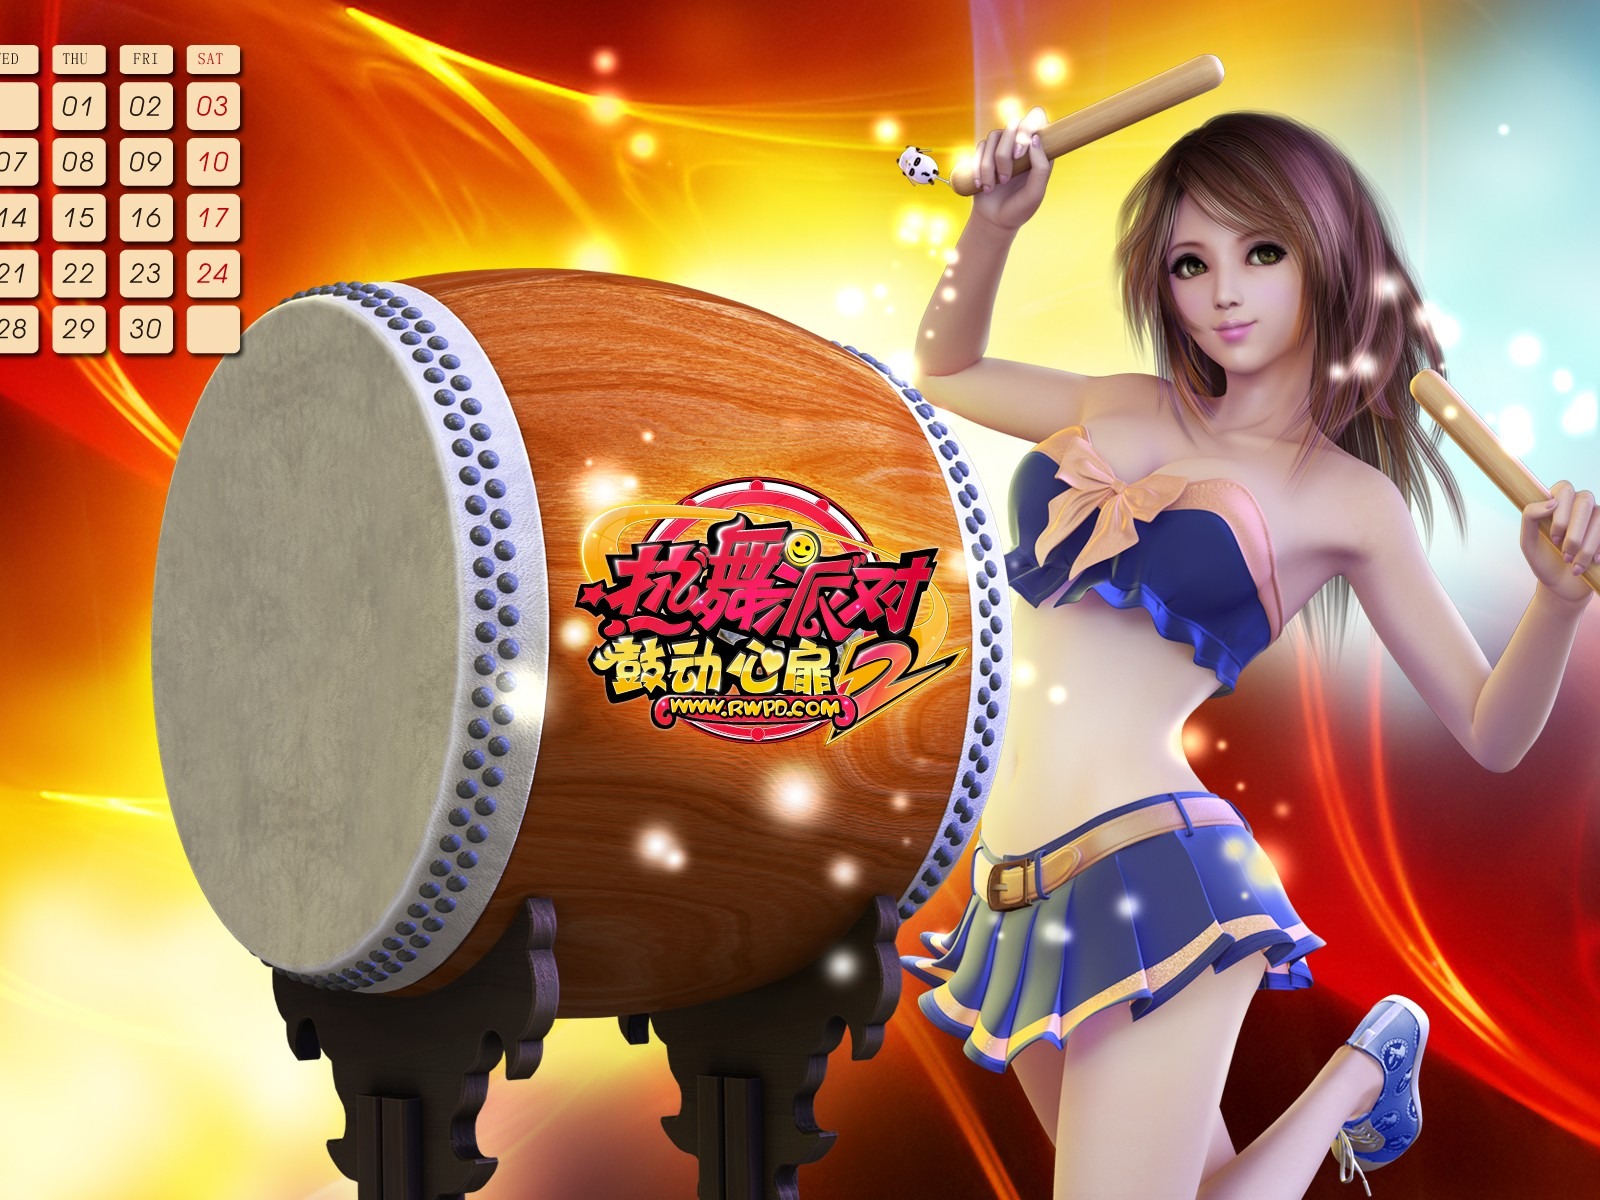 Online game Hot Dance Party II official wallpapers #10 - 1600x1200